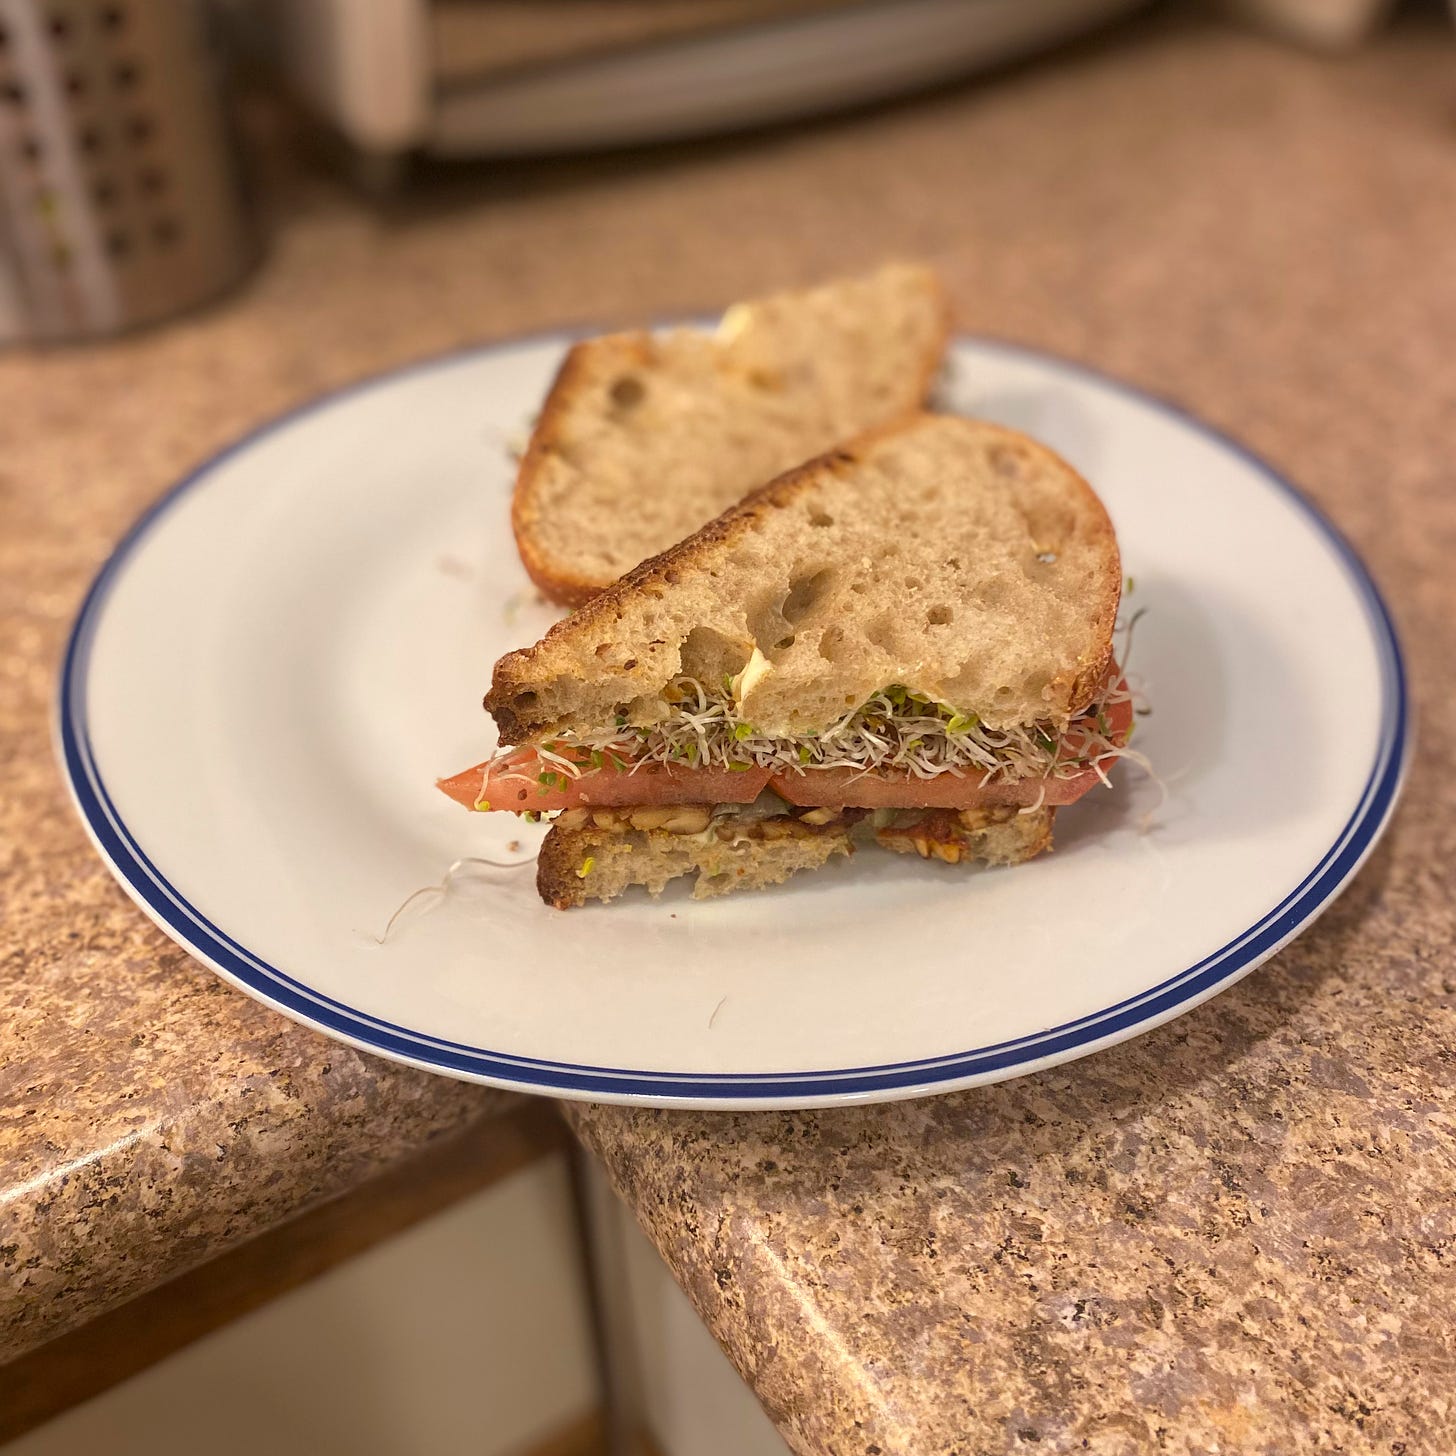 A sandwich, sliced in half, on a white plate with a blue rim. The cut half of the sandwich faces out, and inside is tempeh, tomato, sprouts, and mayonnaise.